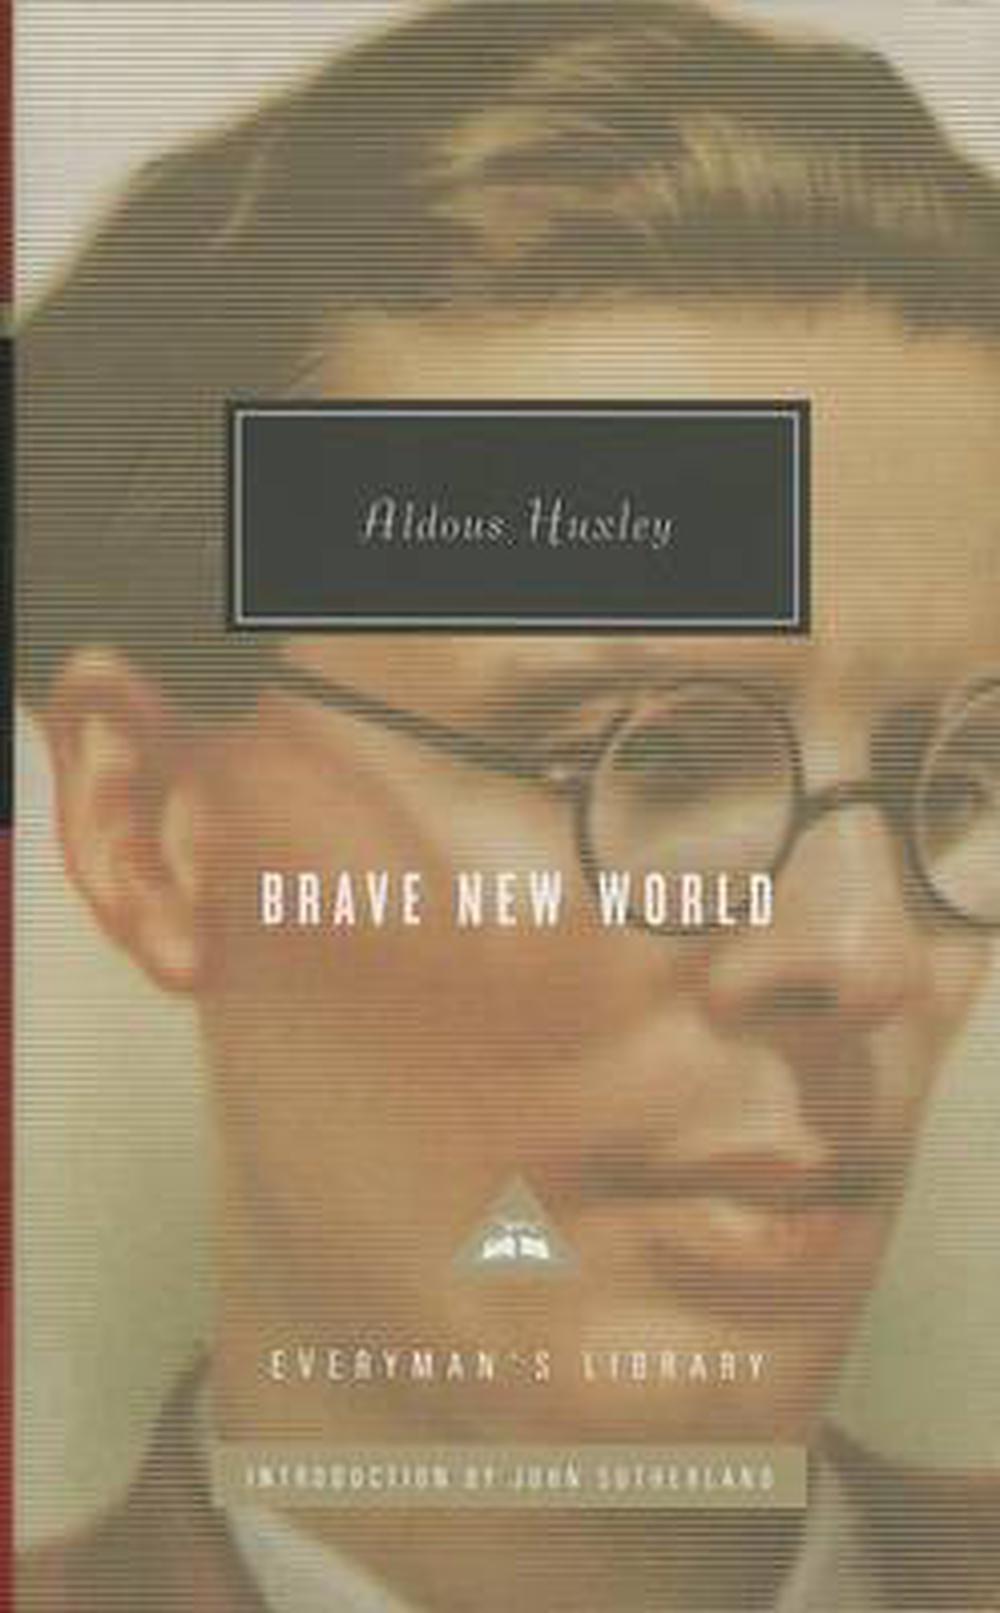 what is brave new world book about